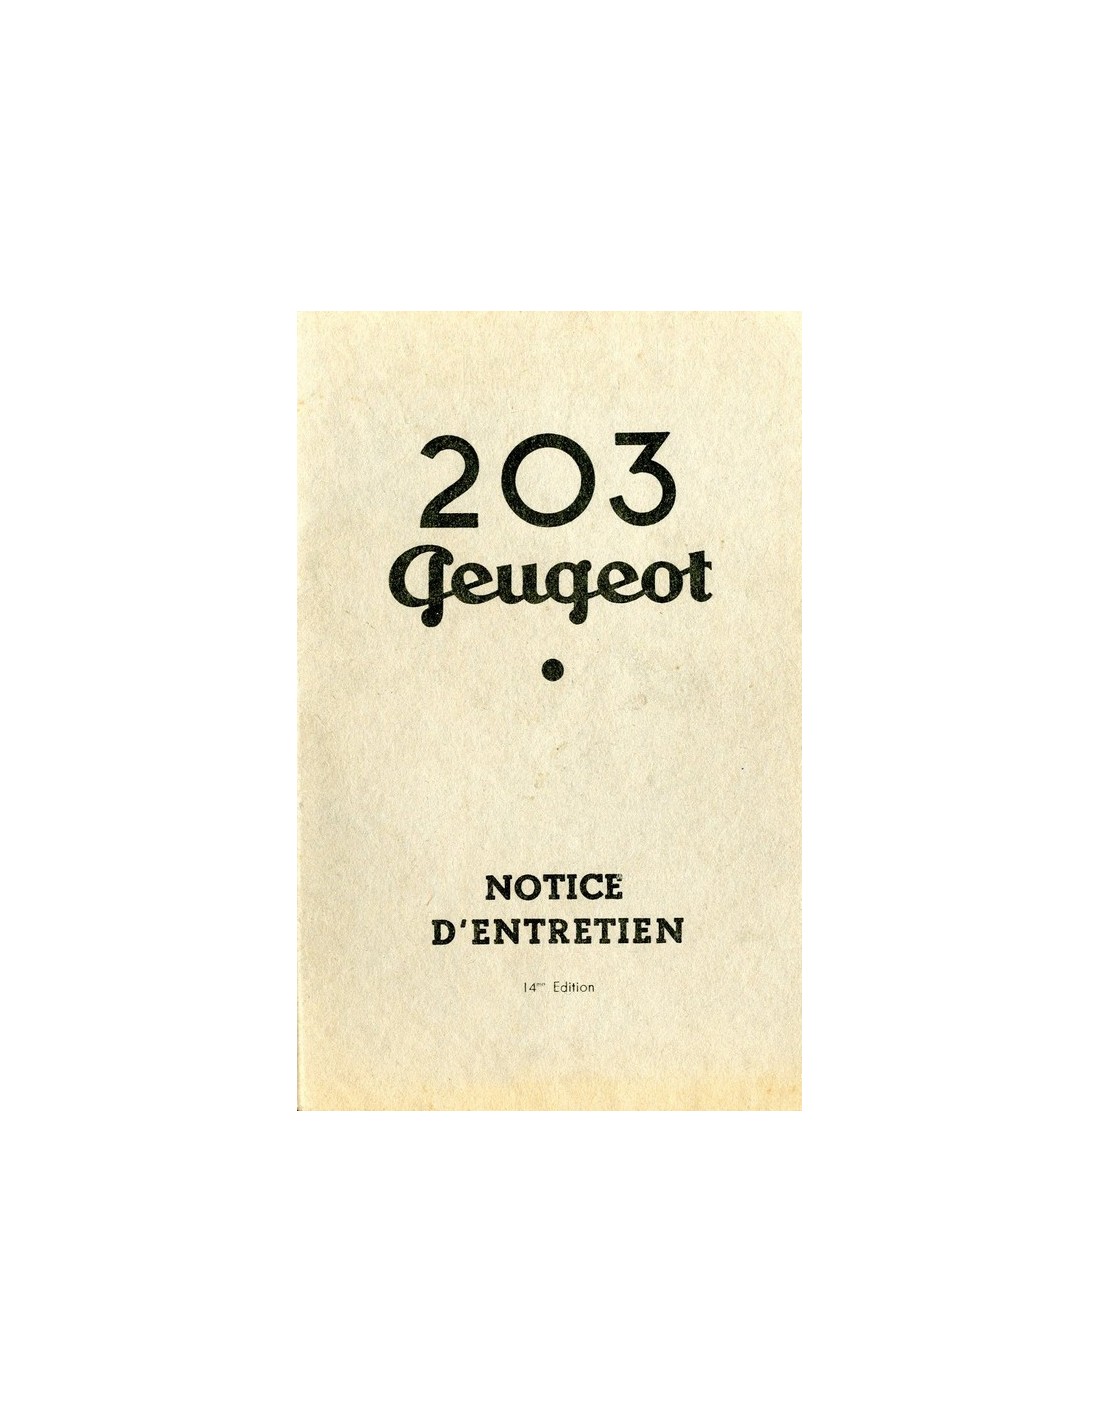 1956 PEUGEOT 203 OWNER'S MANUAL FRENCH